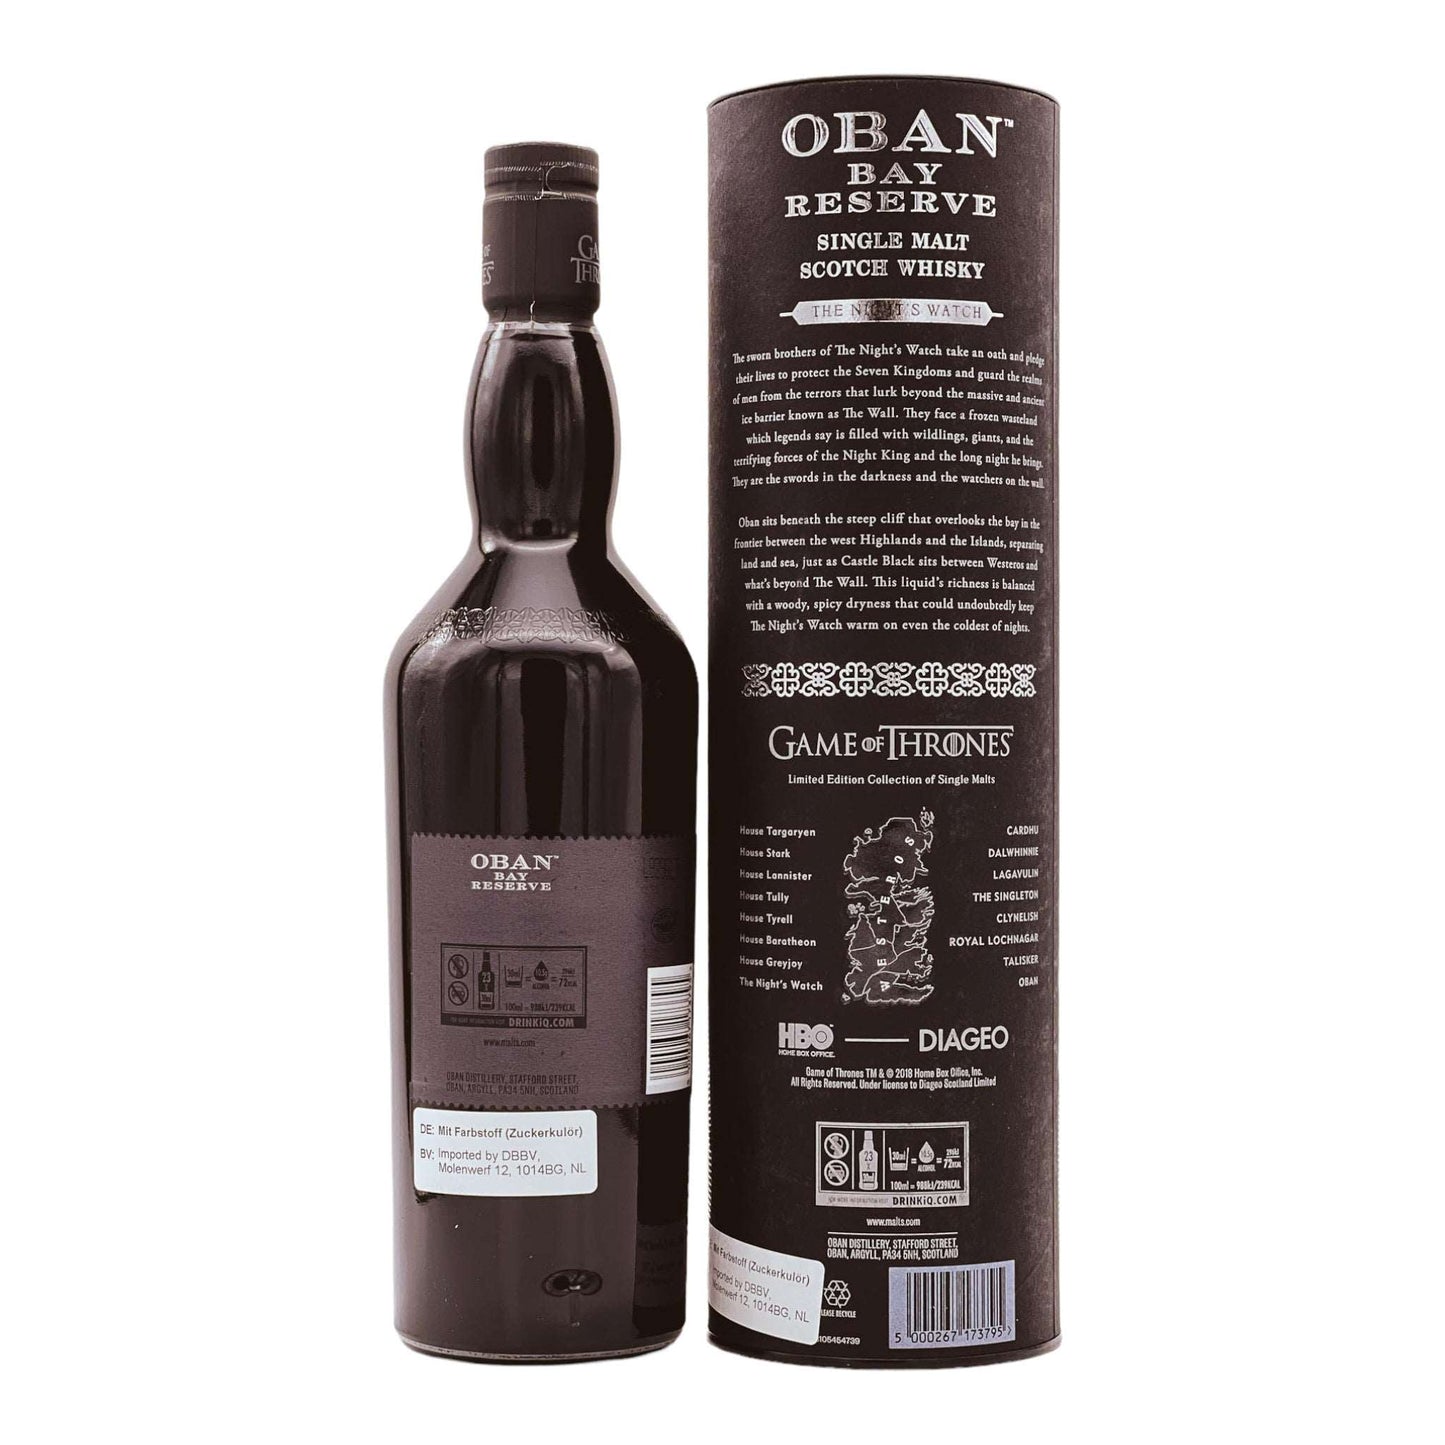 Oban | Bay Reserve | The Night’s Watch | Game of Thrones | 0,7l | 43%GET A BOTTLE